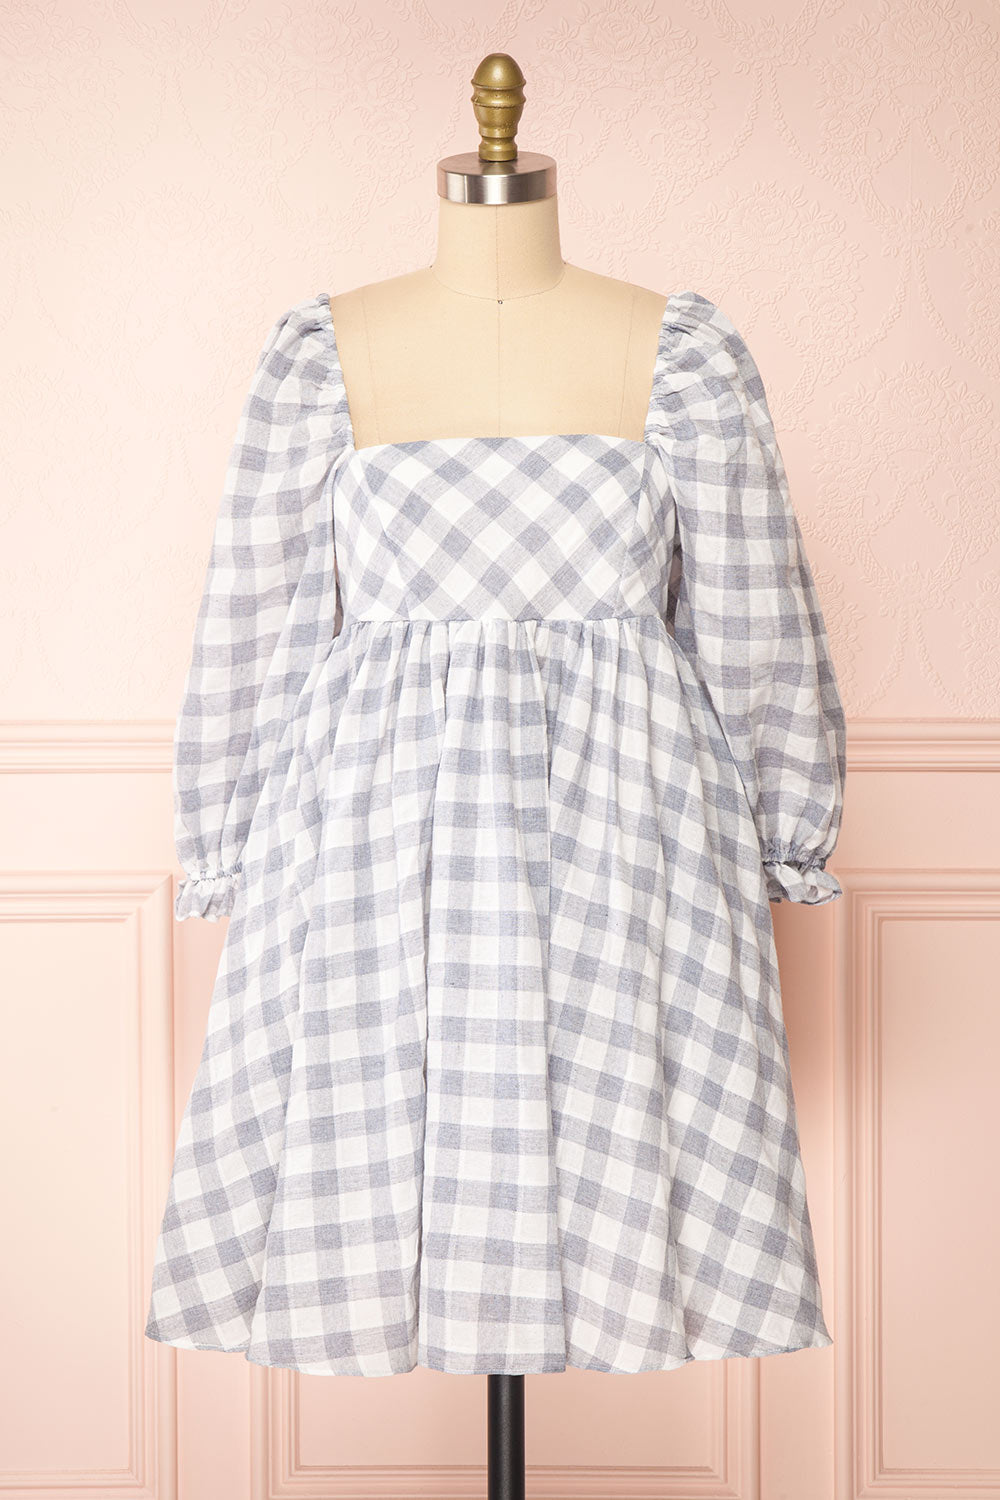 Conie Blue | Puffed Sleeves Short Checkered Dress front view 